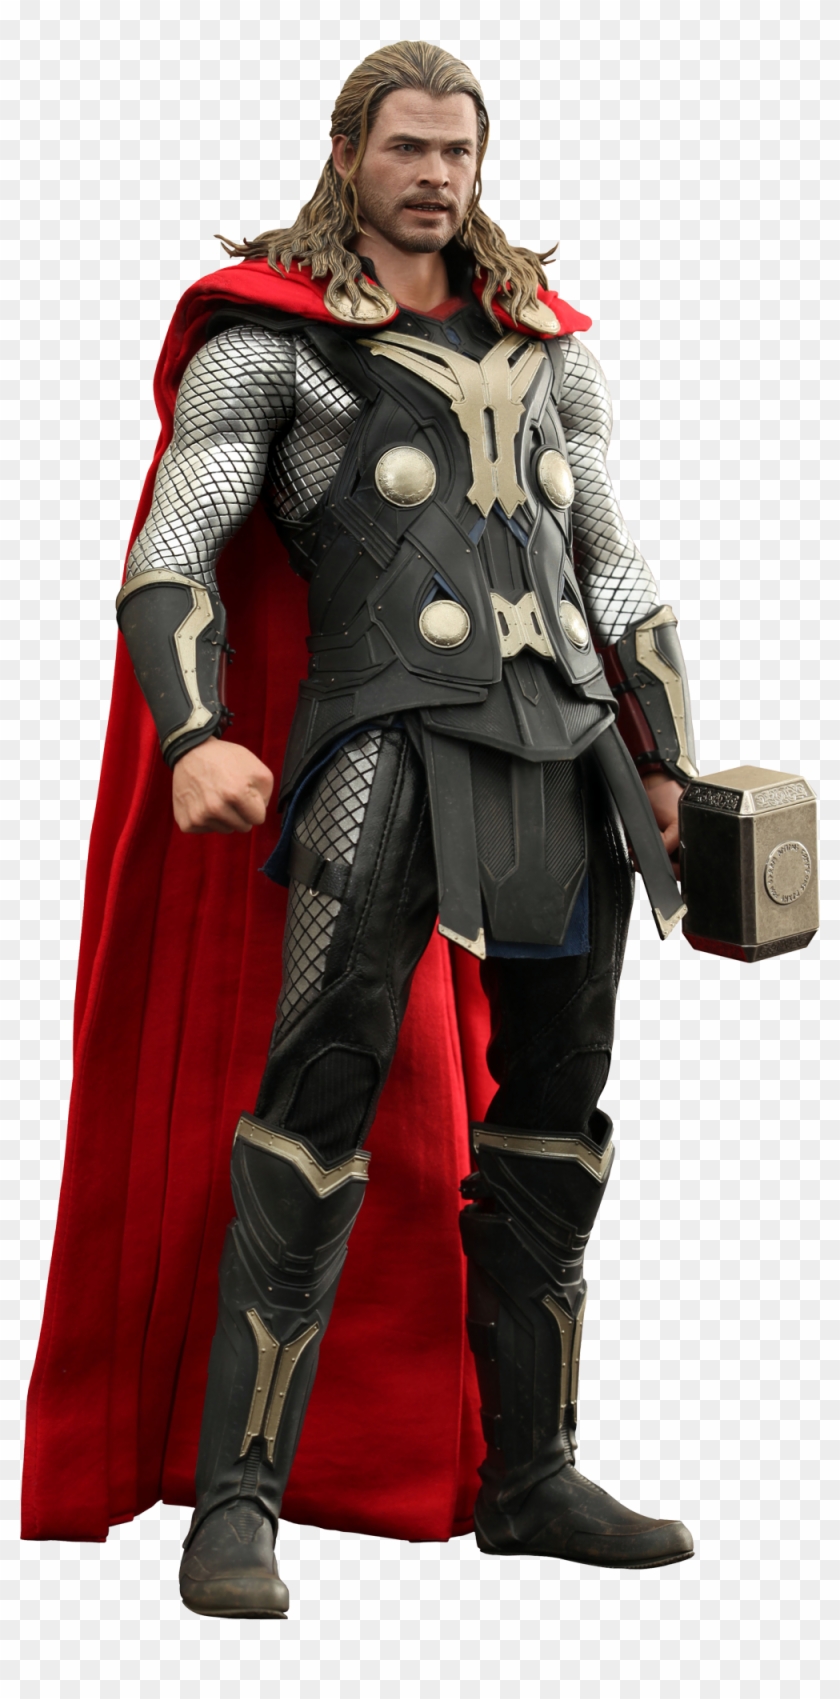 Thor Png Image - Hot Toys Thor The Dark World Clipart #539737